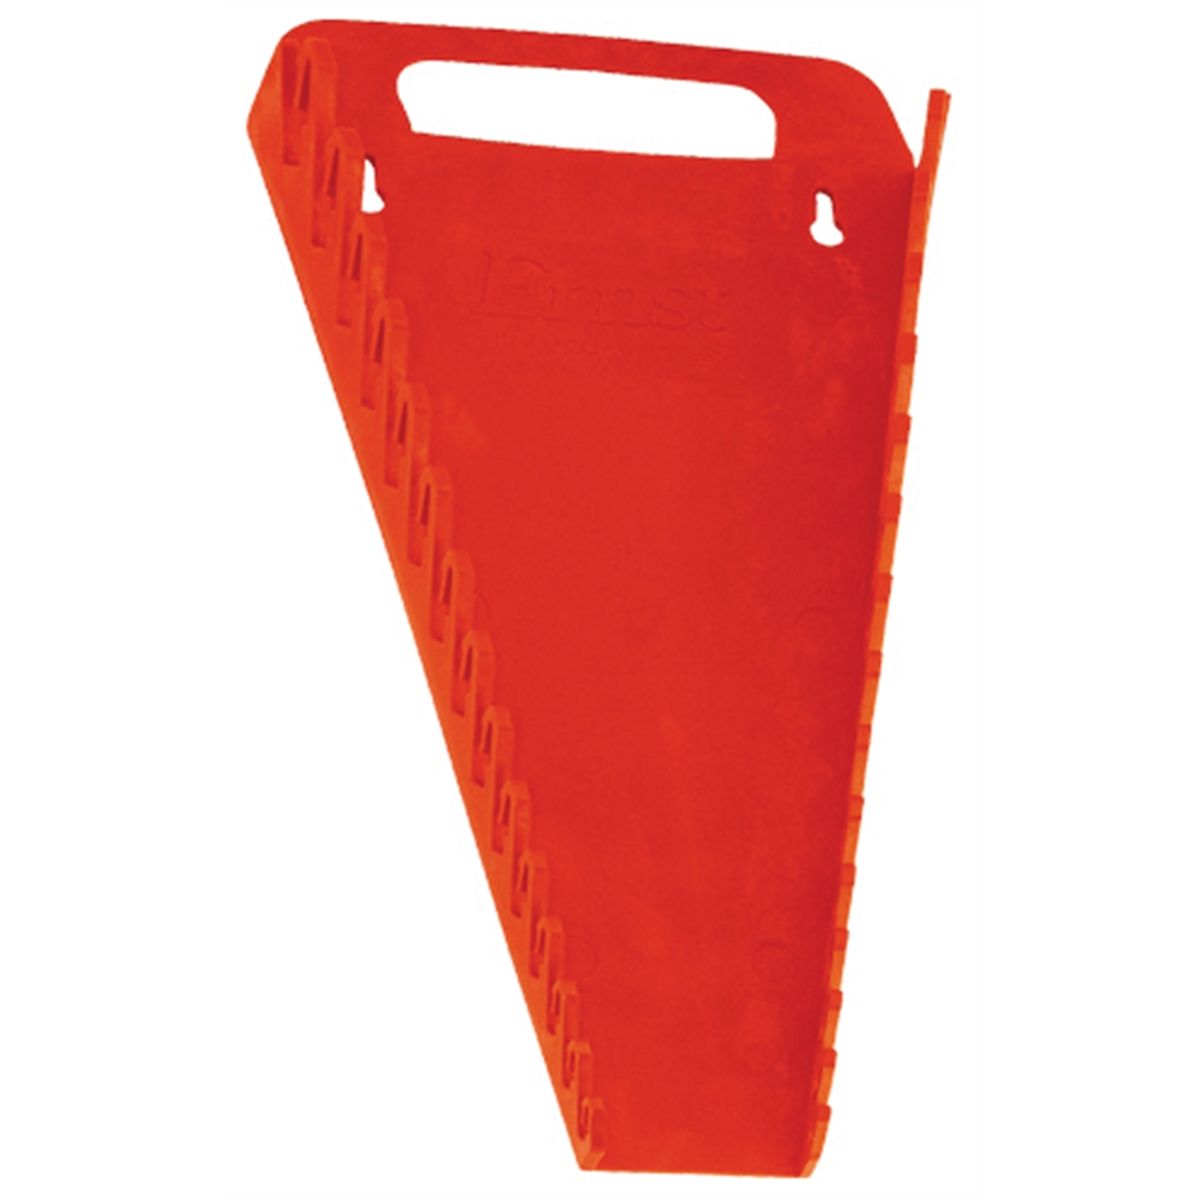 Plastic 15" Wrench Red Gripper